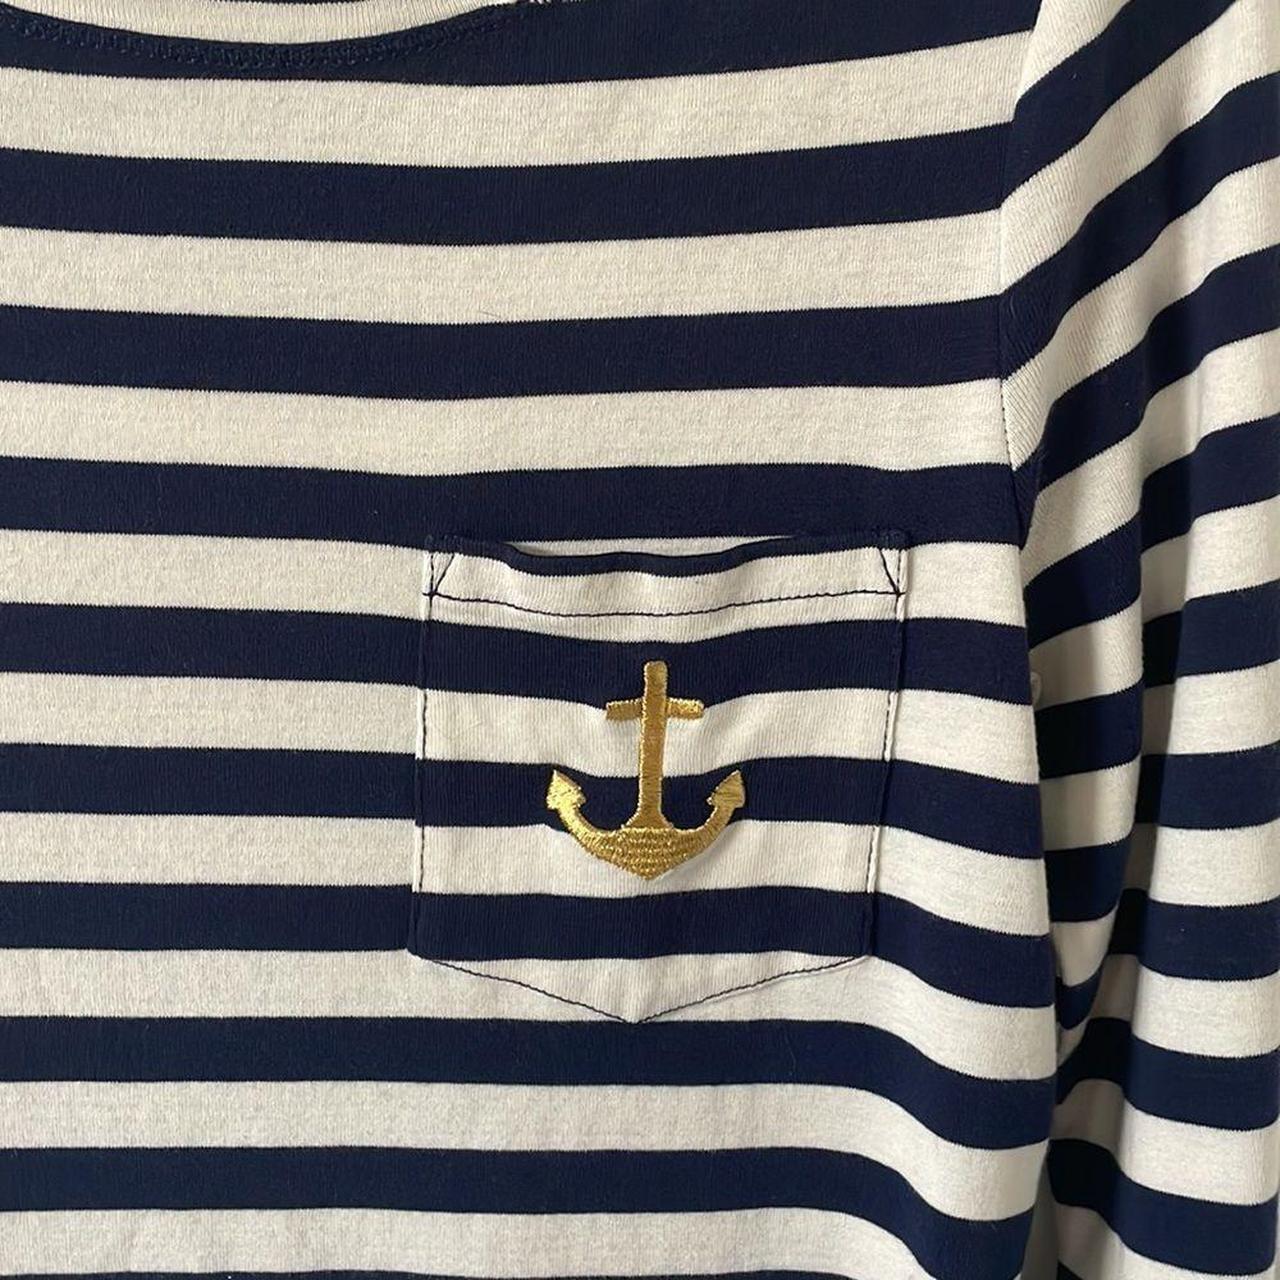 Sperry Women's White and Blue Shirt (2)